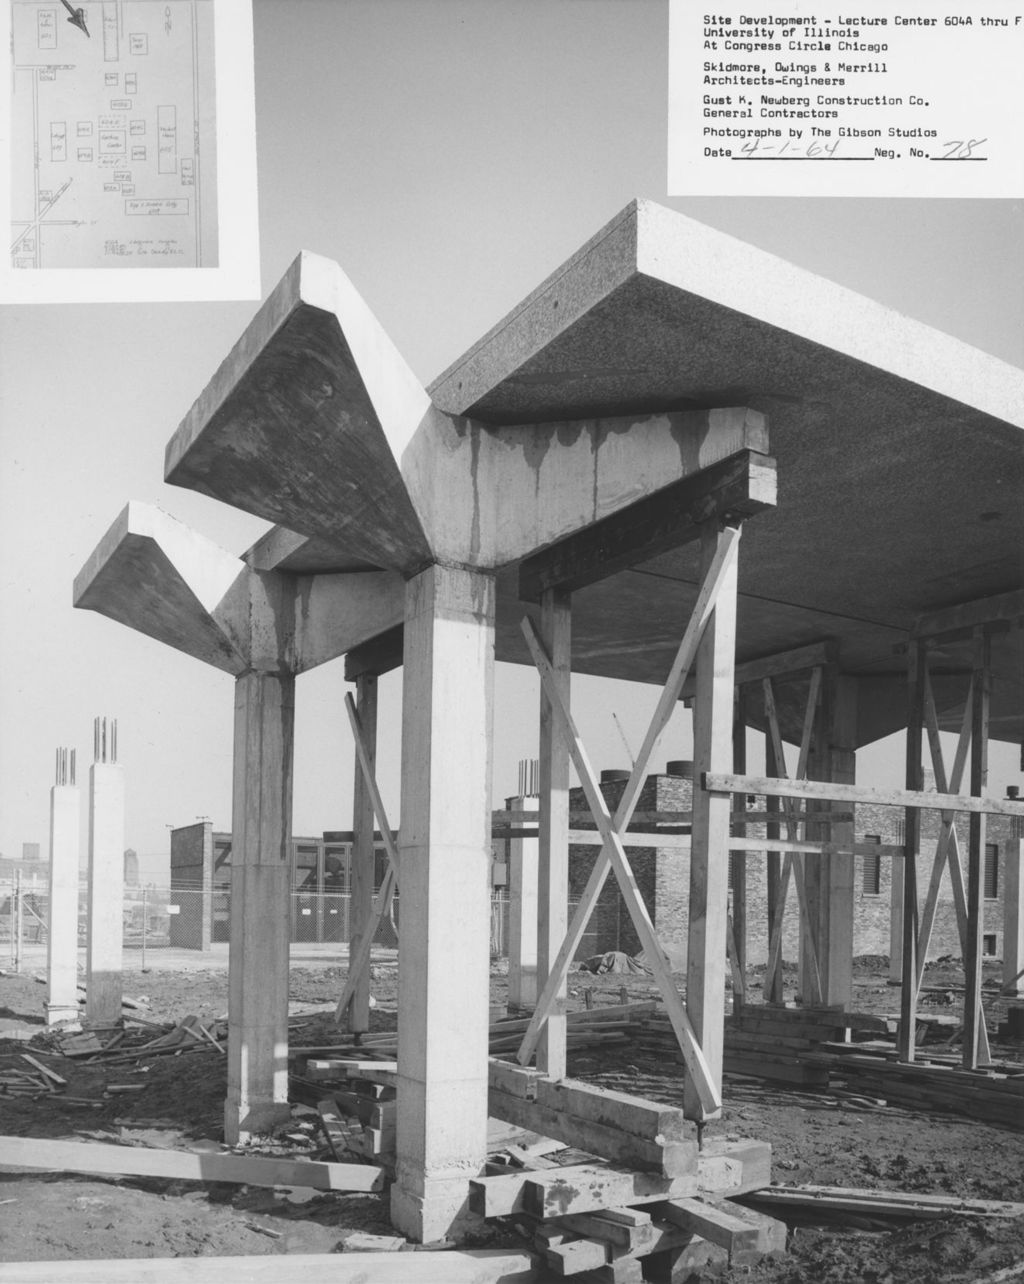 Miniature of Elevated walkway construction, University of Illinois at Chicago Circle